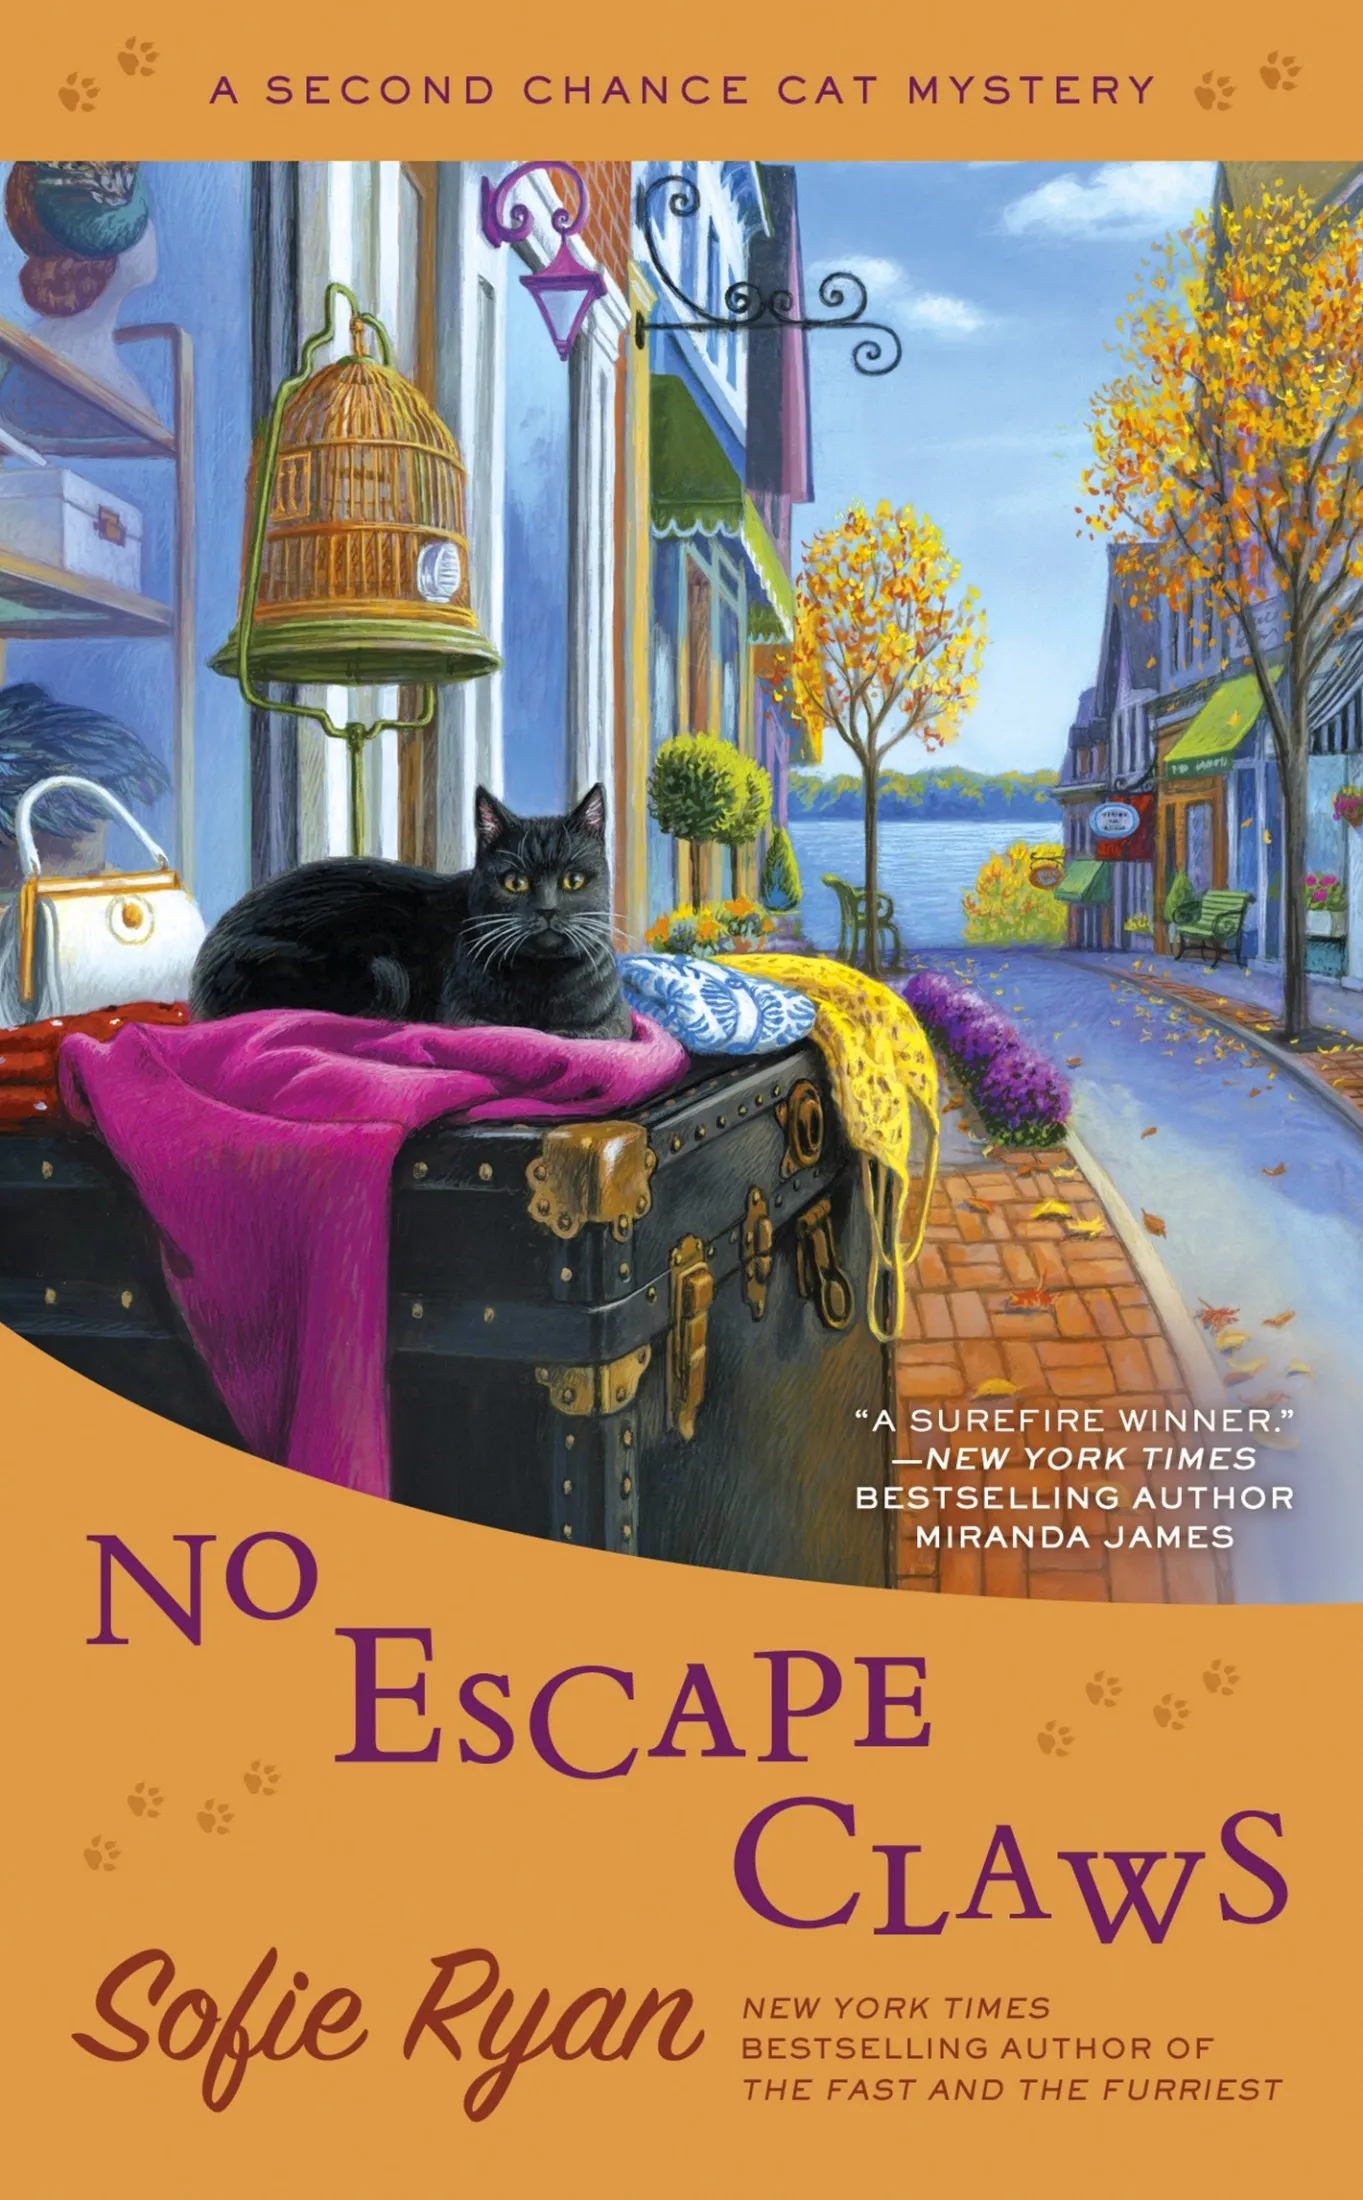 No Escape Claws (Second Chance Cat Mystery #6)